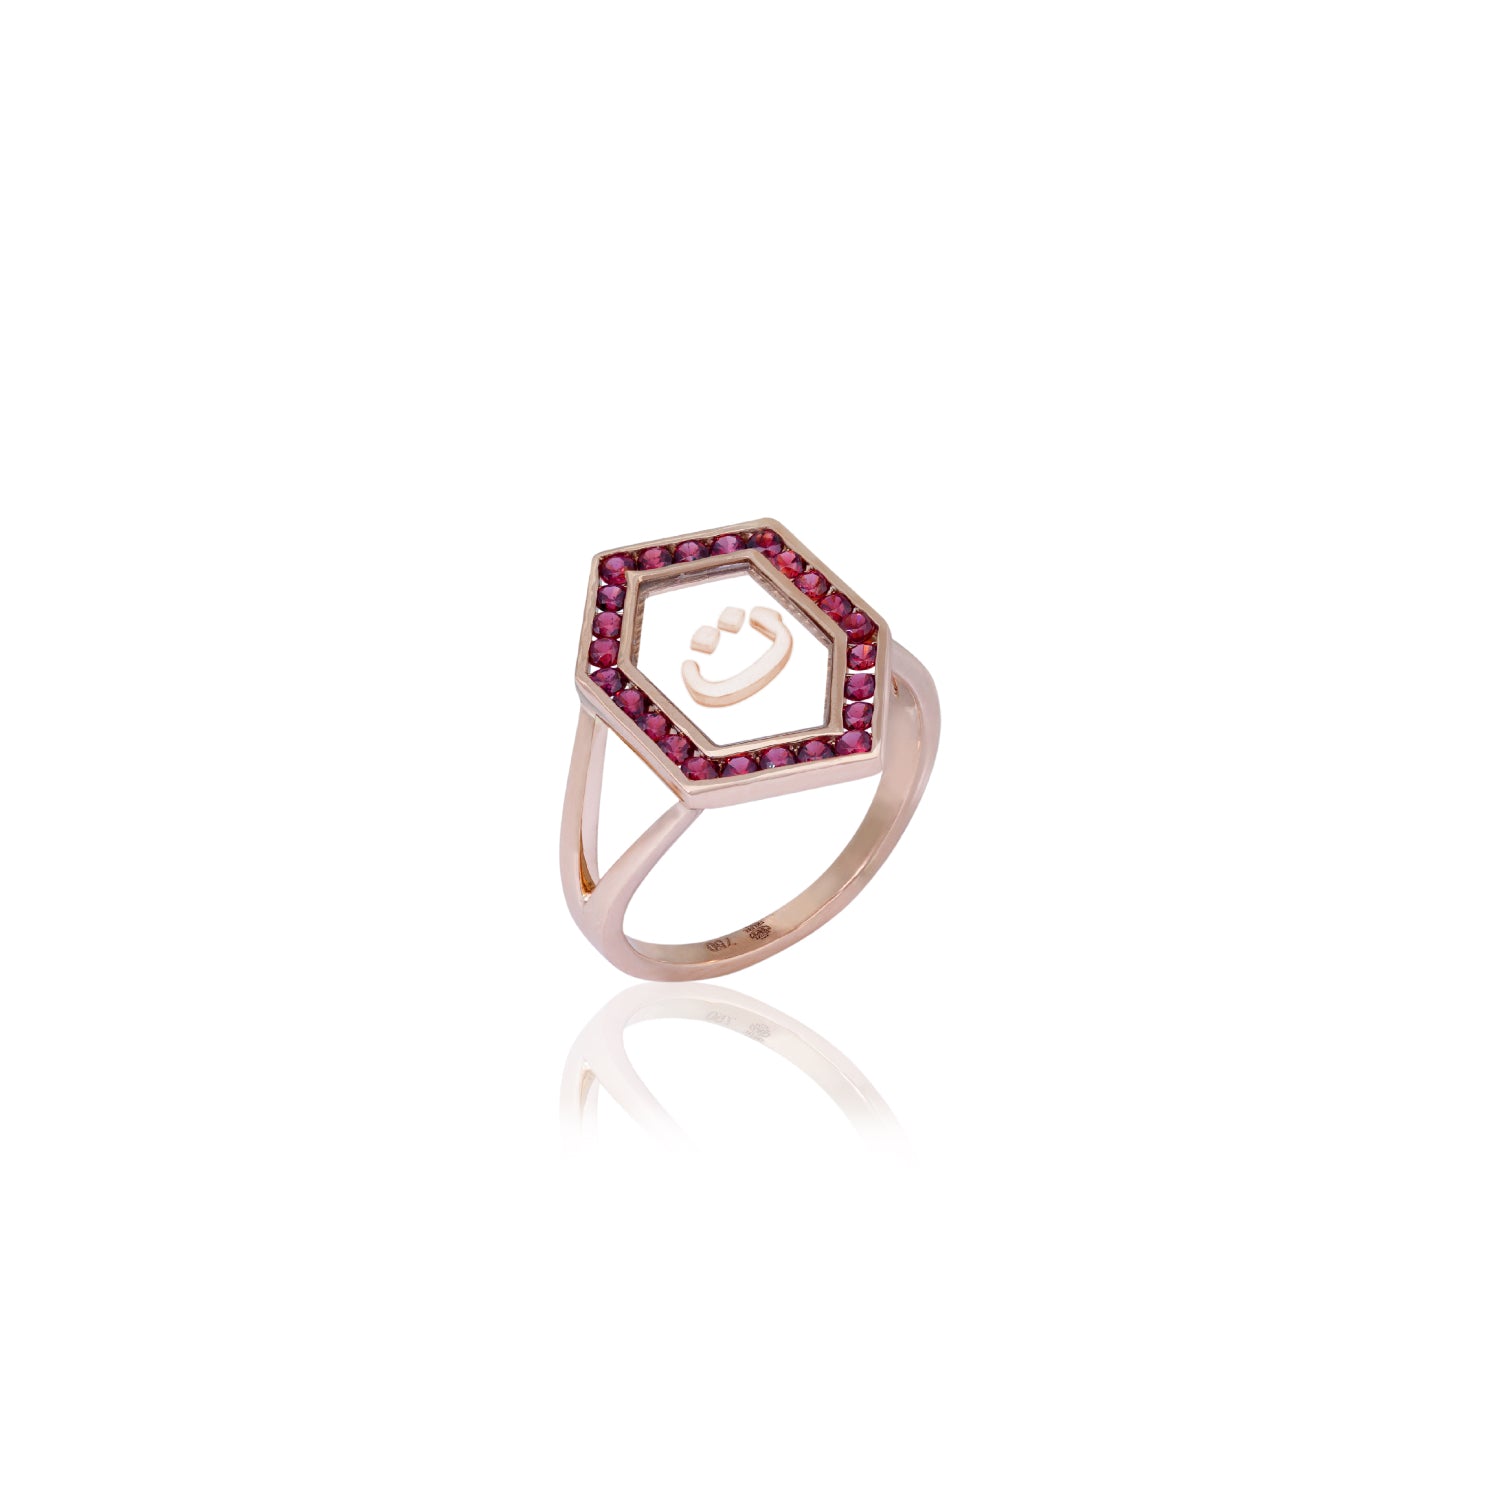 Qamoos 1.0 Letter ت Ruby Ring in Rose Gold